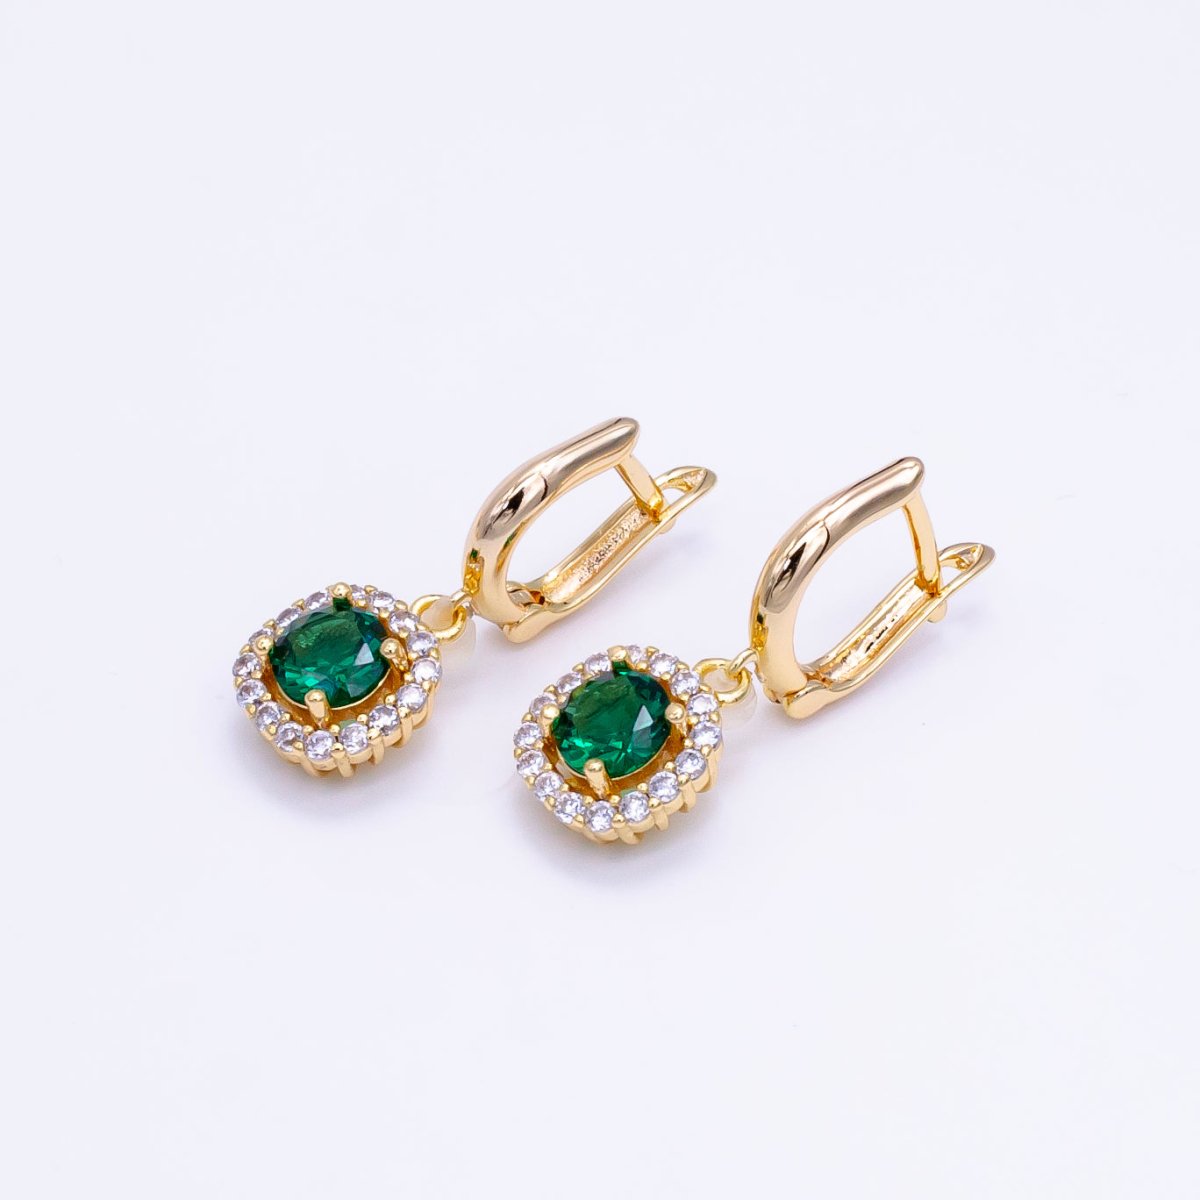 16K Gold Filled Clear, Black, Red, Blue, Green CZ Micro Paved Square Drop English Lock Earrings | AB1156 - AB1158 - DLUXCA